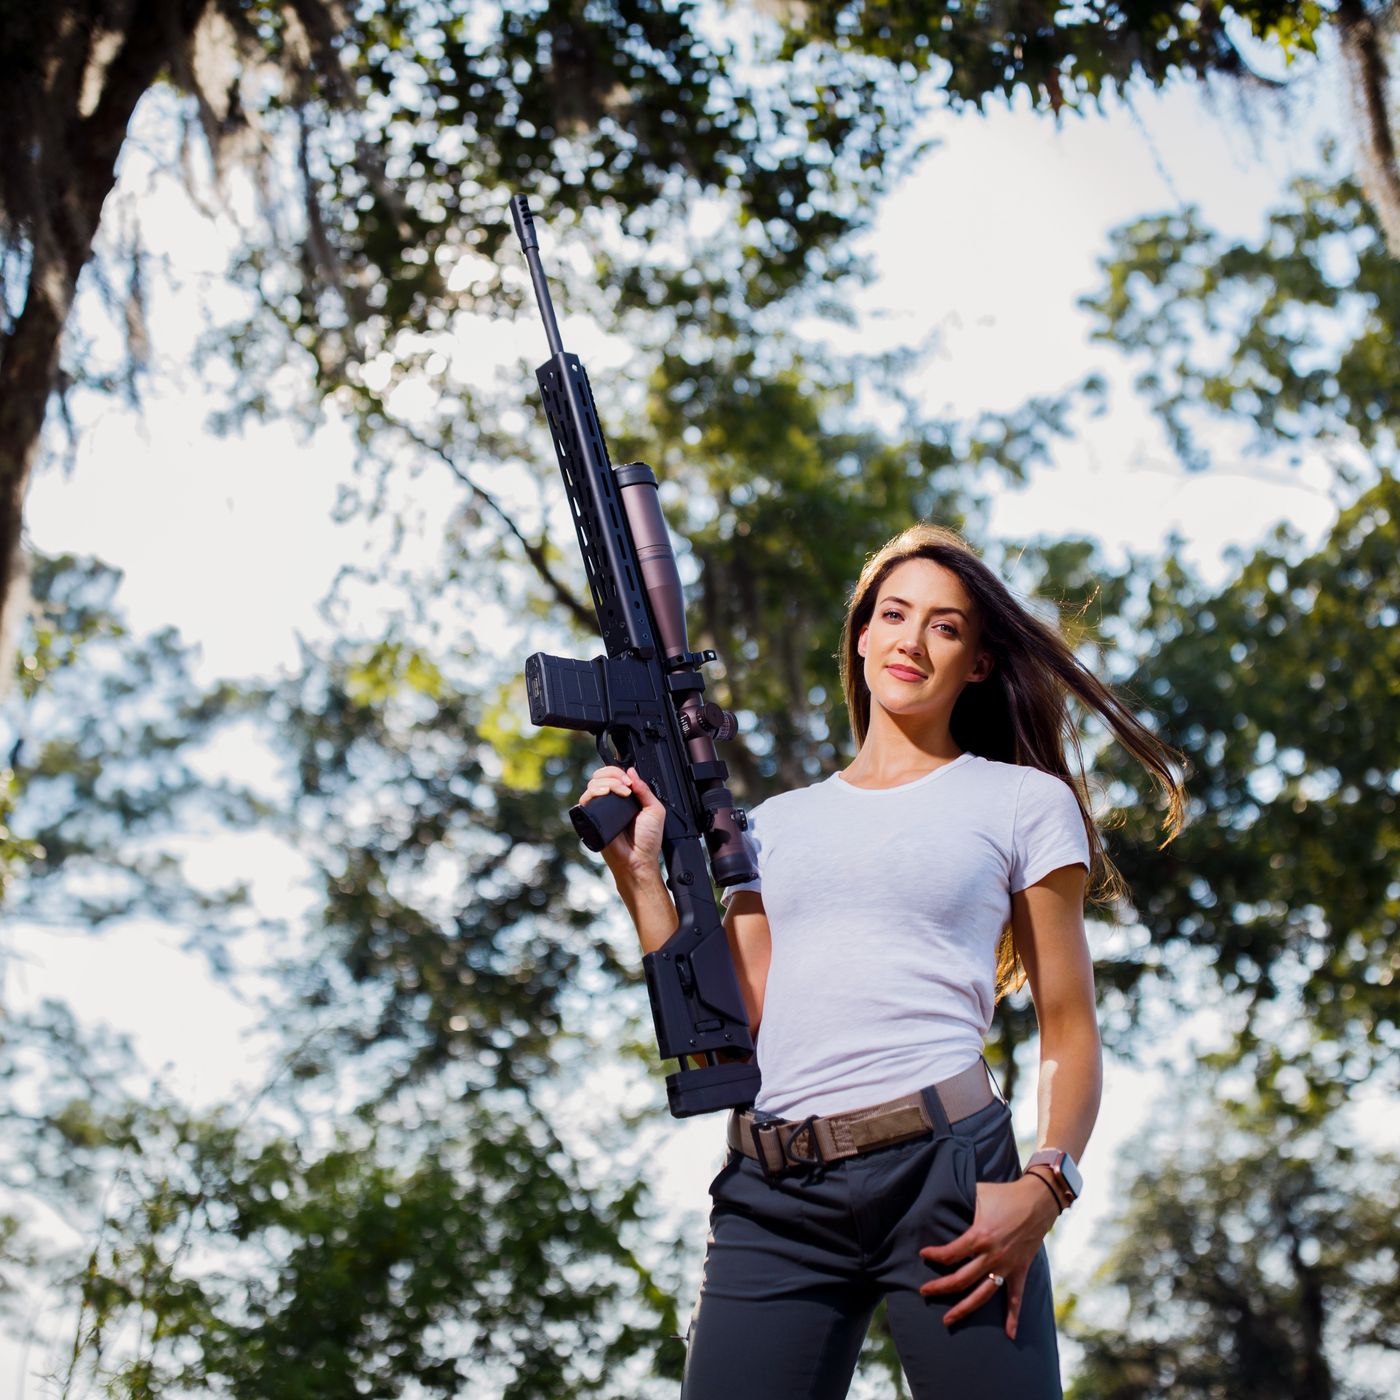 amr ali mohsen recommends sexy women shooting guns pic